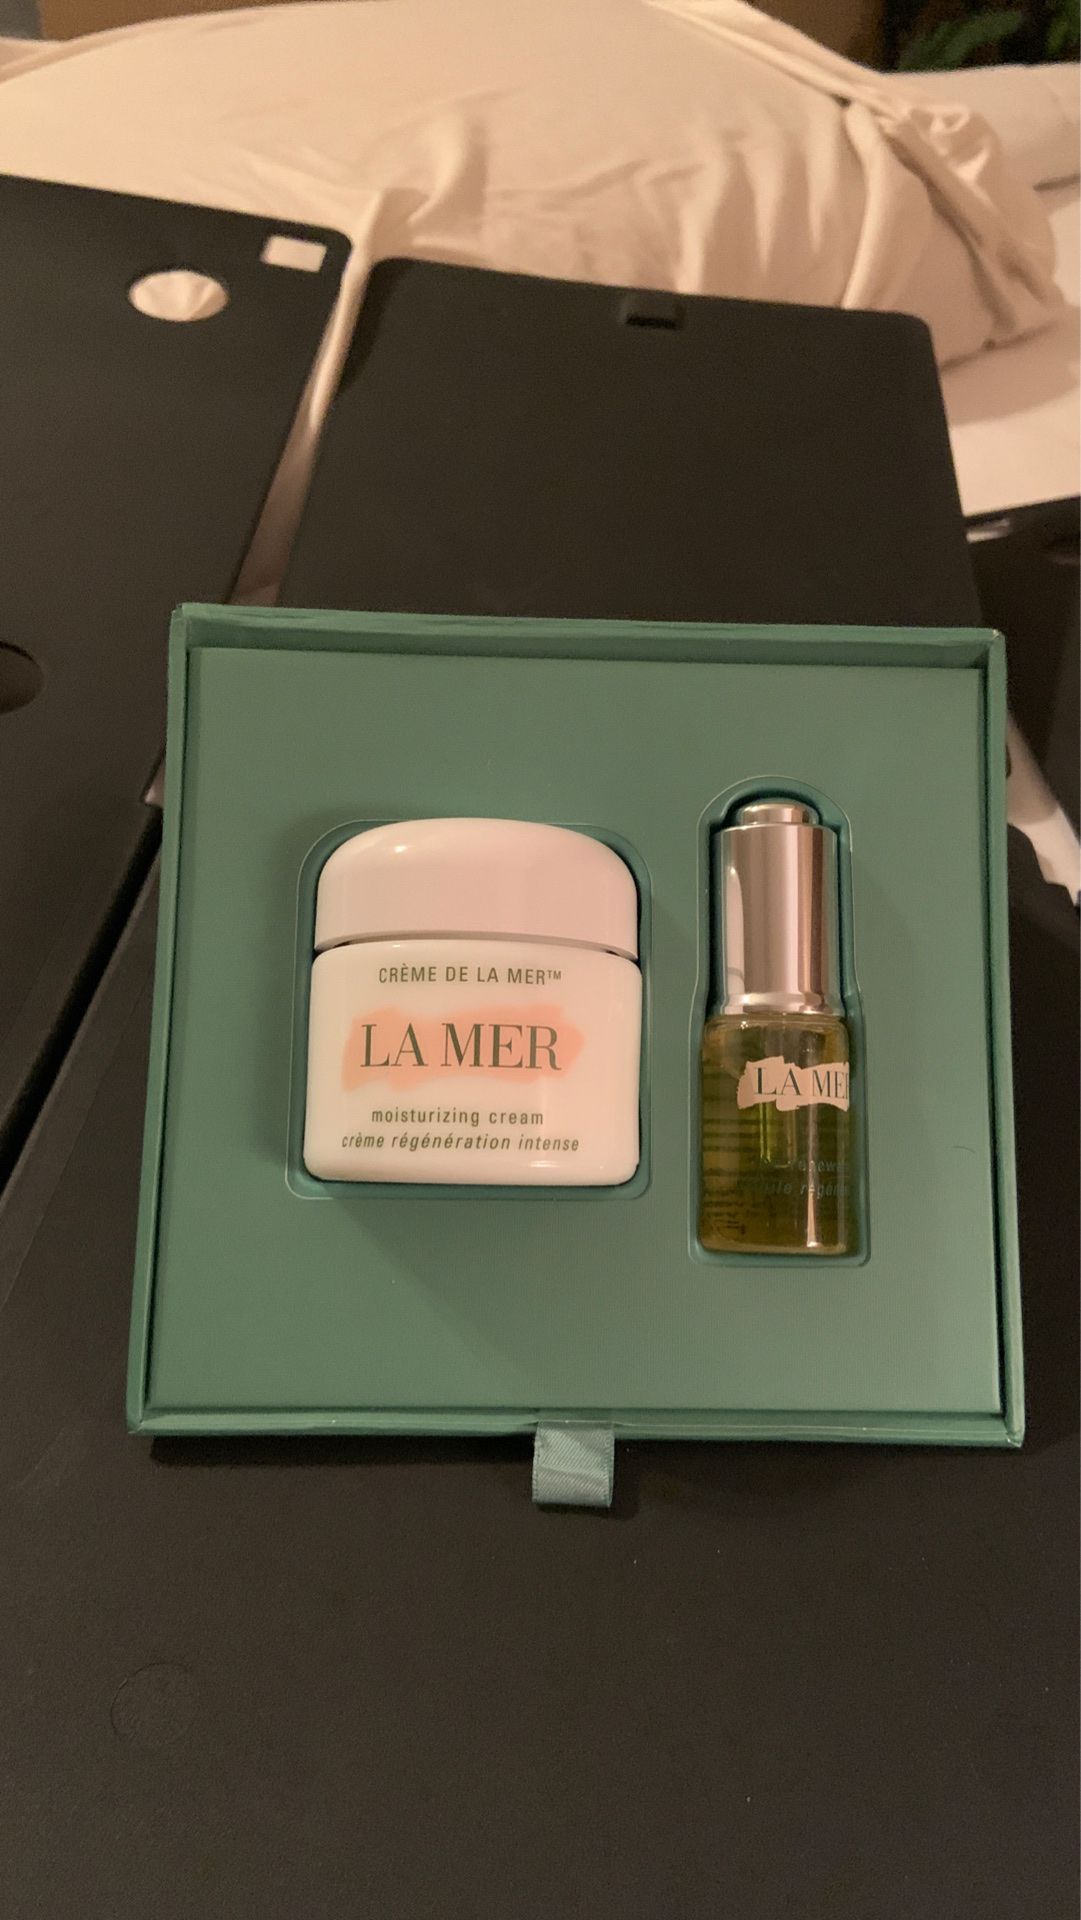 Lamer lotion and renewal oil